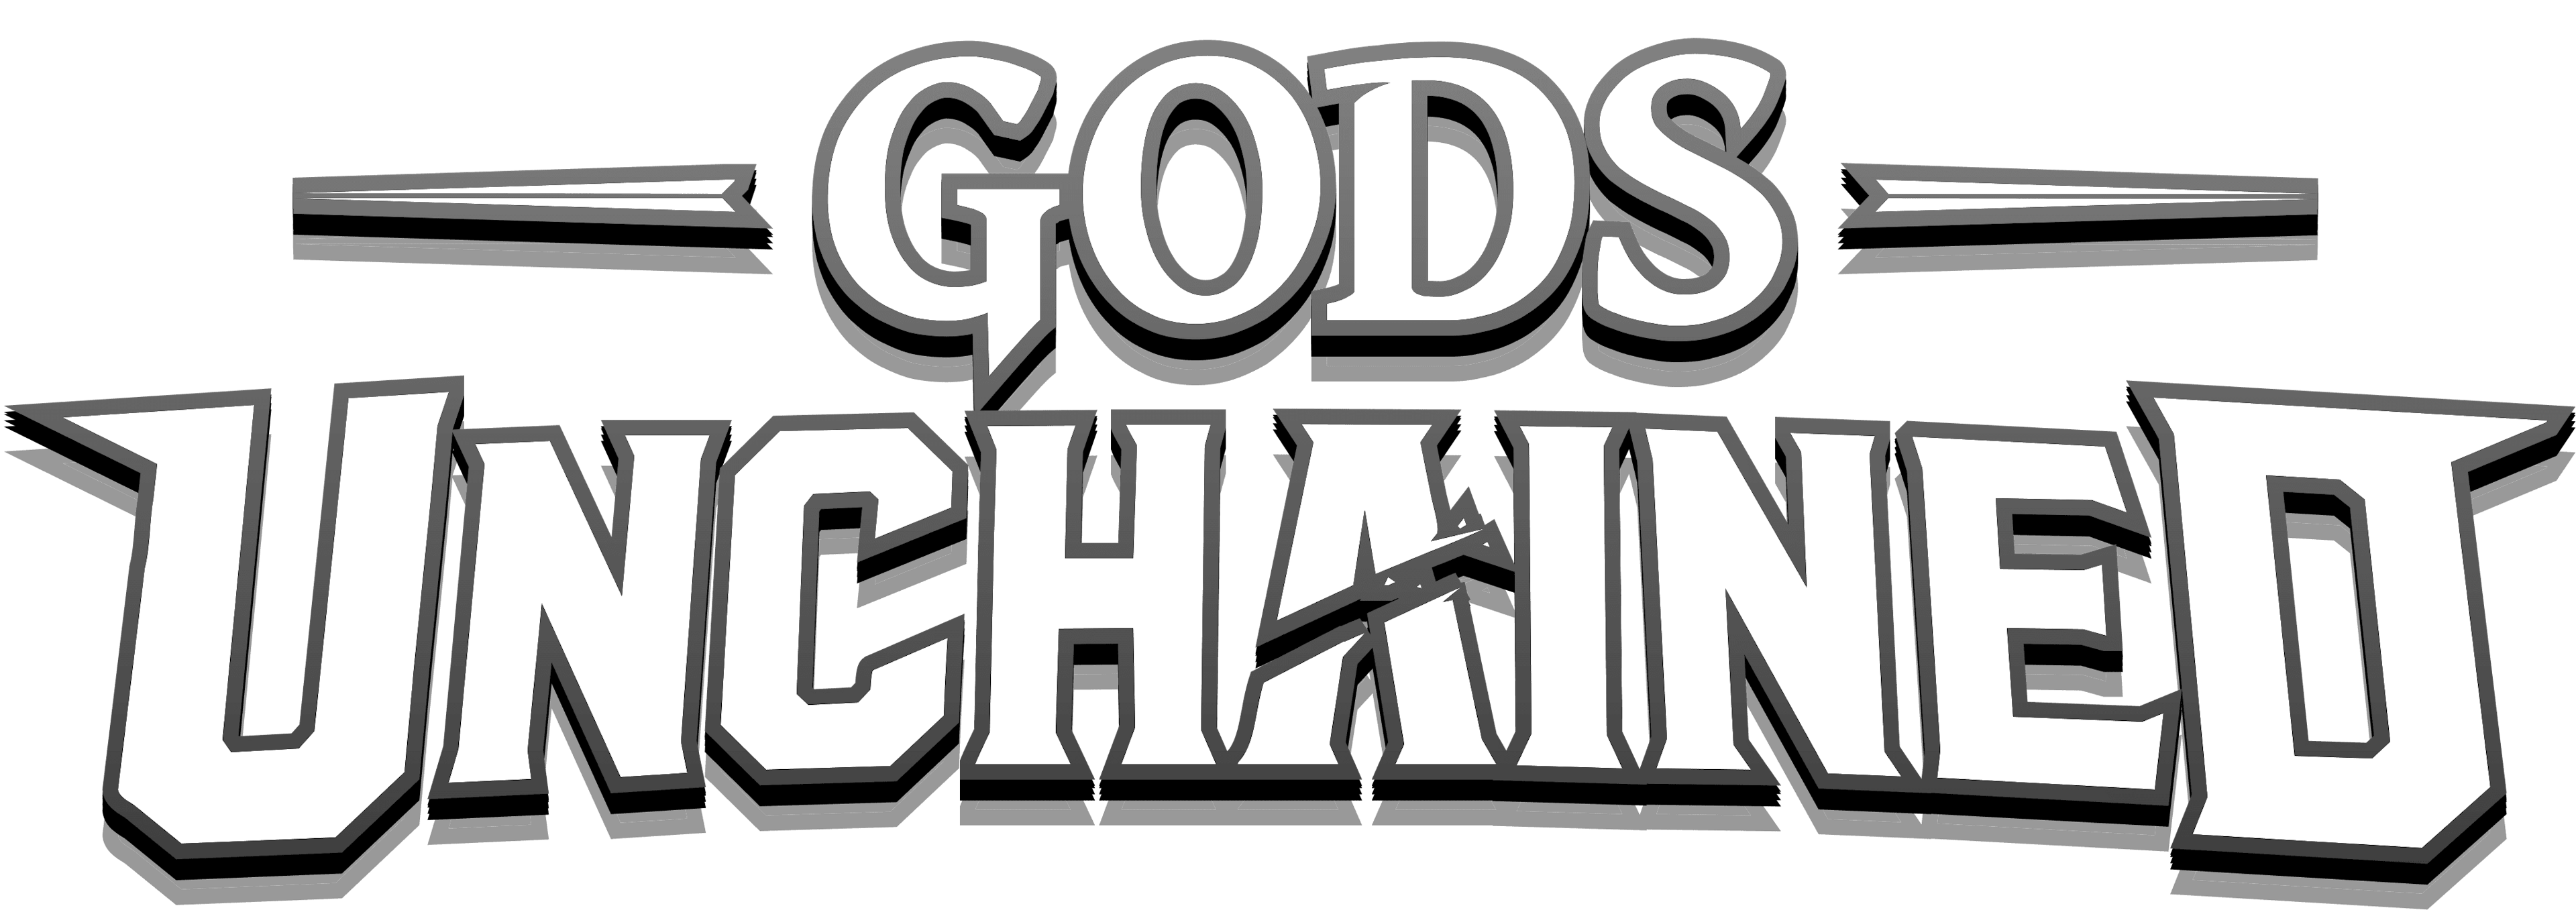 gods unchained new logo.png